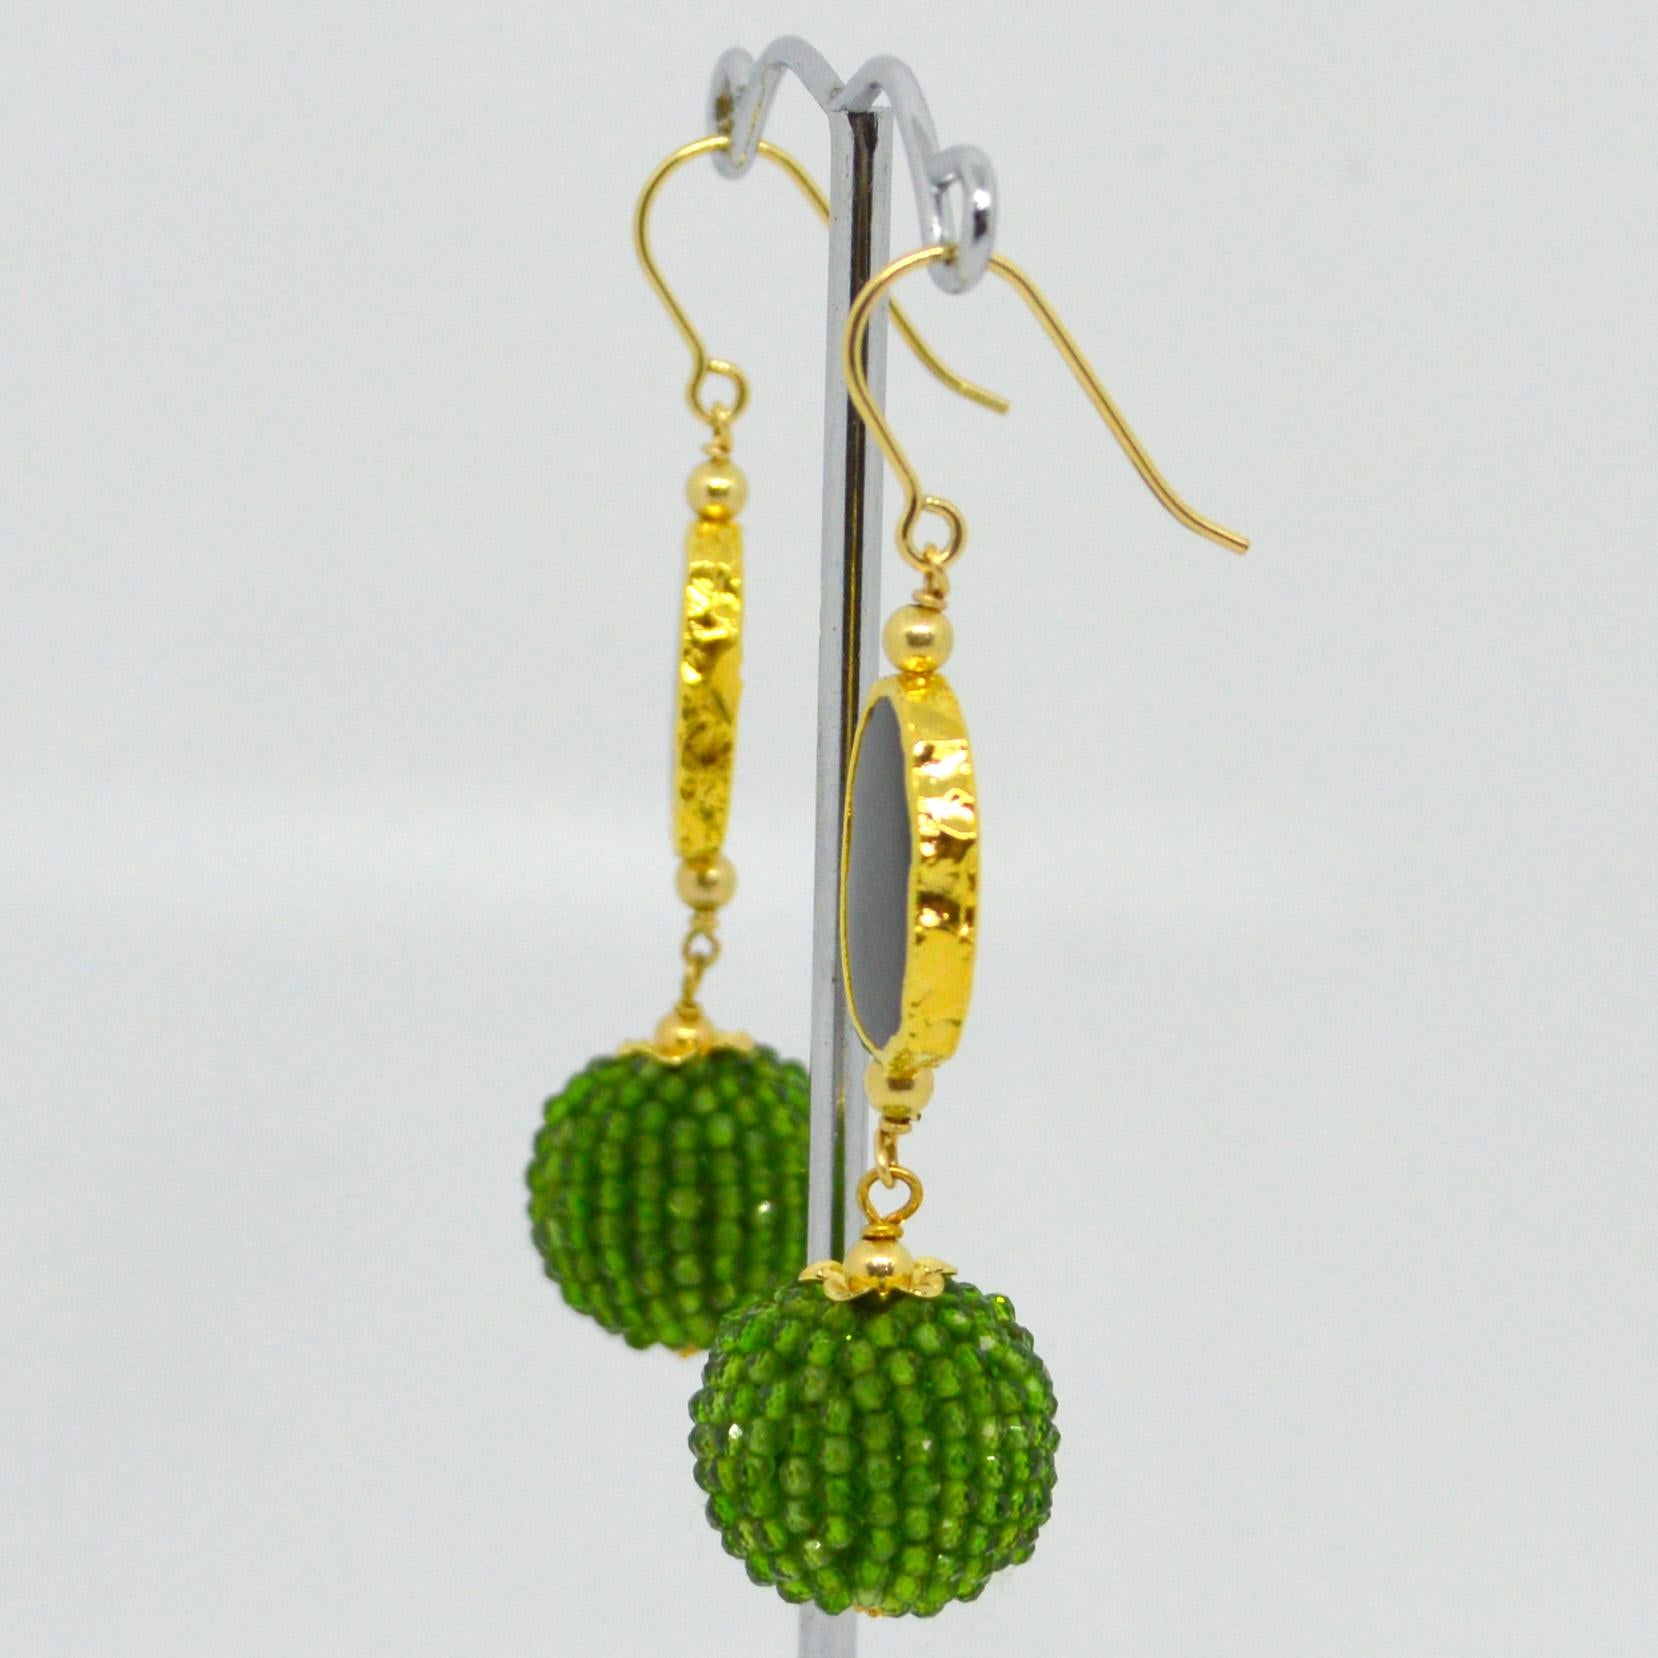 Gold plate Sterling silver  Onyx slice 12x15mm with a hand made beaded bead of Chrome Diopside mirco faceted beads 14k Gold Filled headpin and 3mm beads and Sheppard.

Total Earring length 55mm.
